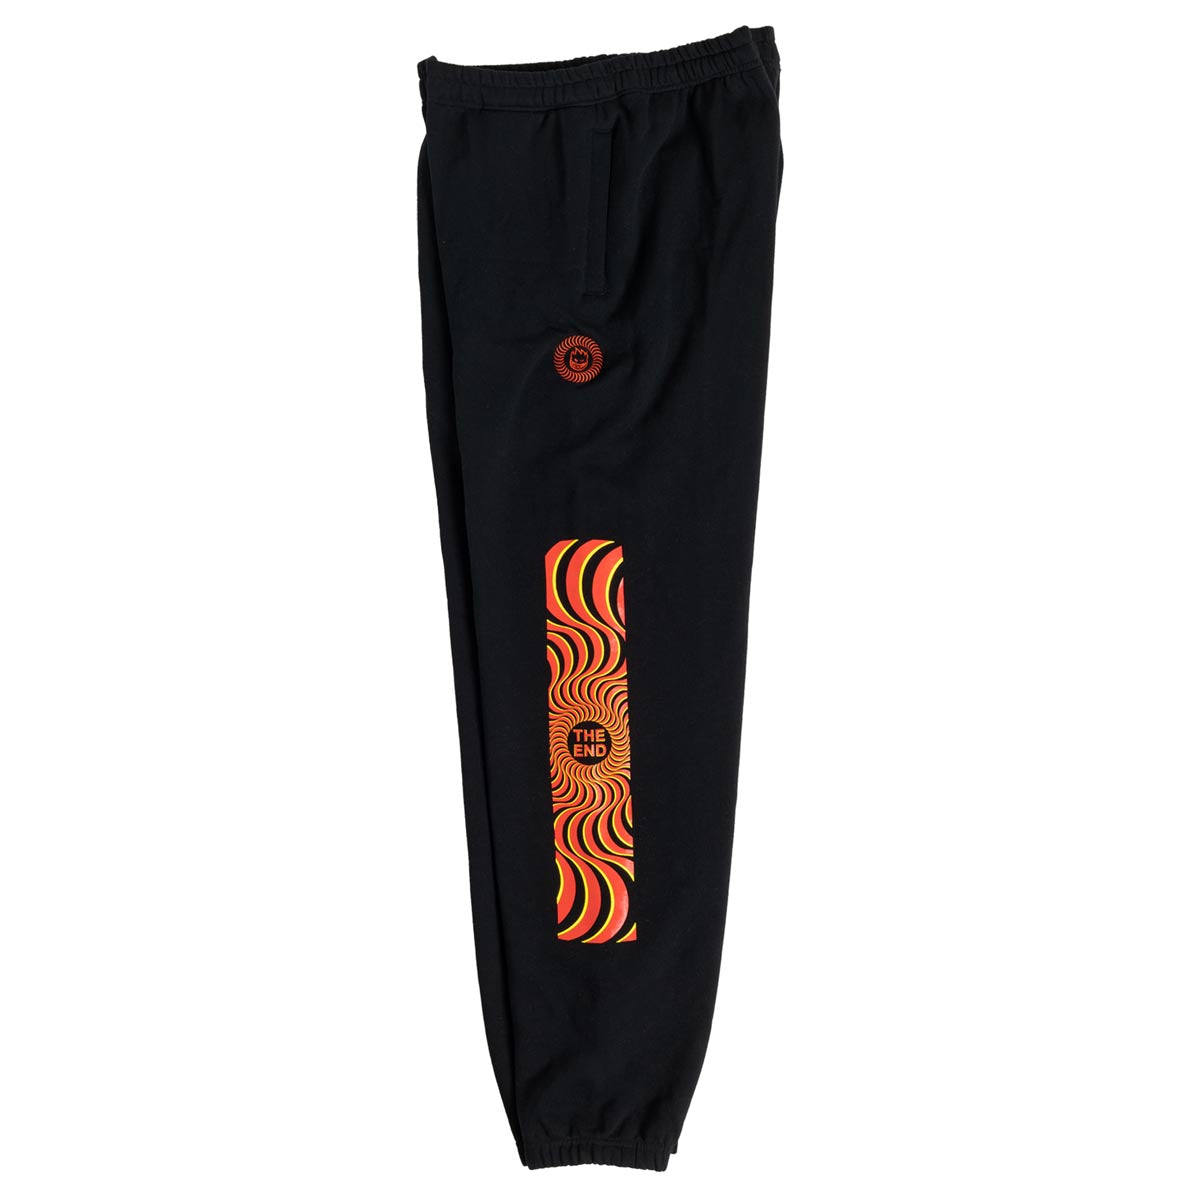 Spitfire Classic Swirl Overlay Sweat Pants - Black/Red Red/Yellow image 3